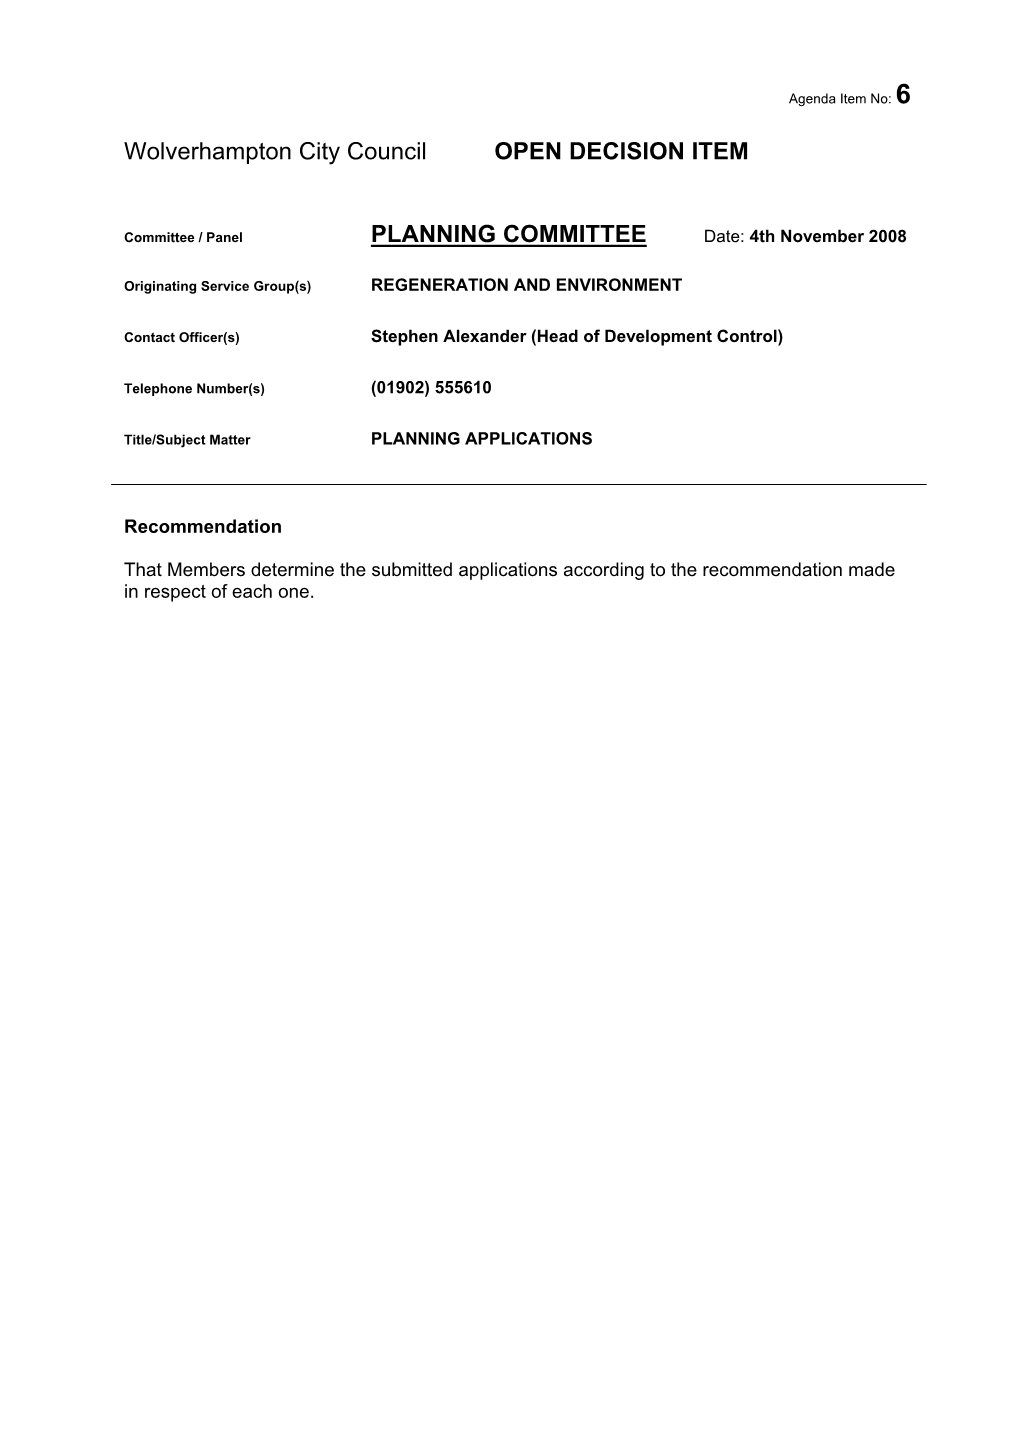 PLANNING COMMITTEE Date: 4Th November 2008